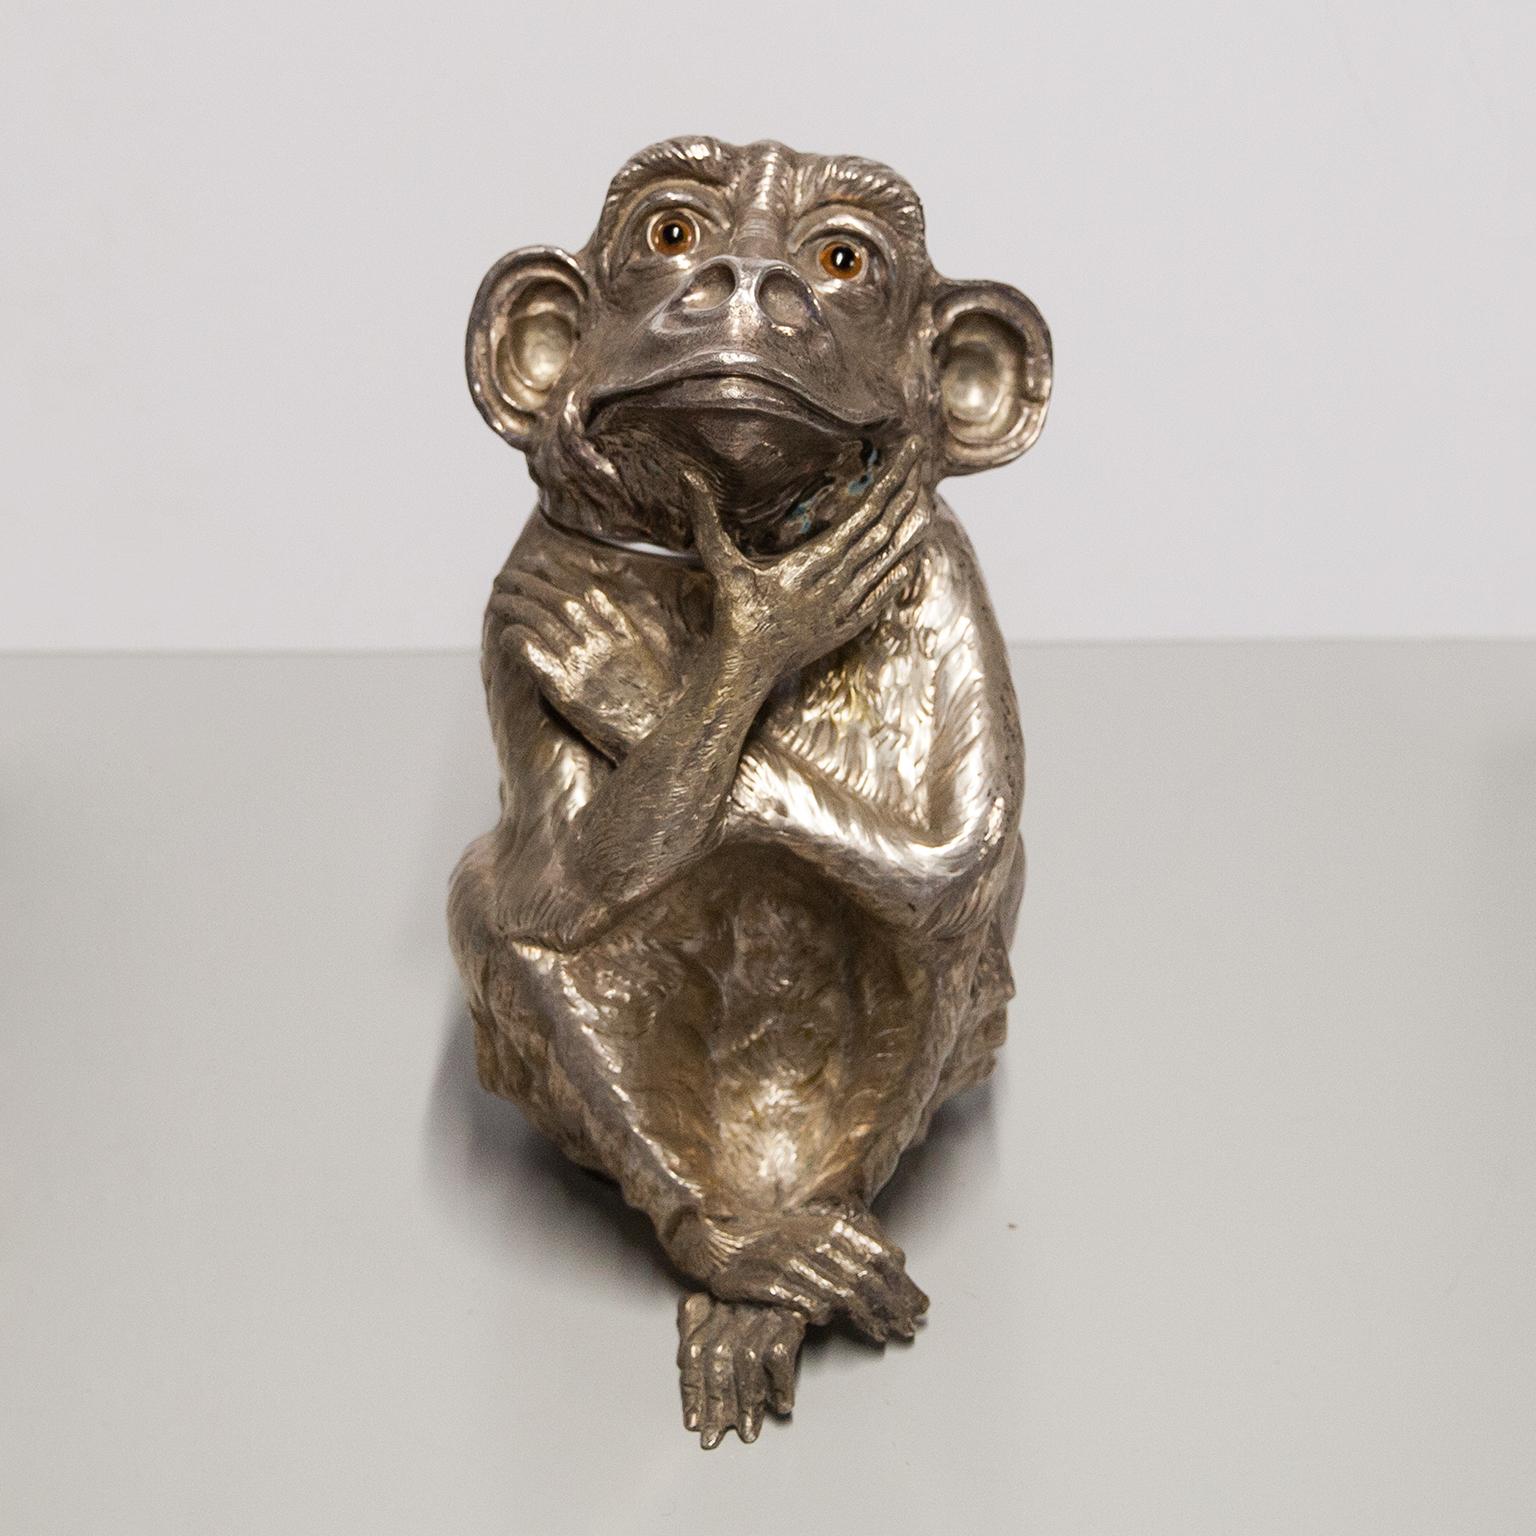 Franco Lapinis rare and famous vintage Monkey sculpture wine cooler or ice bucket is made entirely of metal plated in silver and its surface is lightly textured to give it an organic feel, new plastic inlay inside.
Either alone or combined with